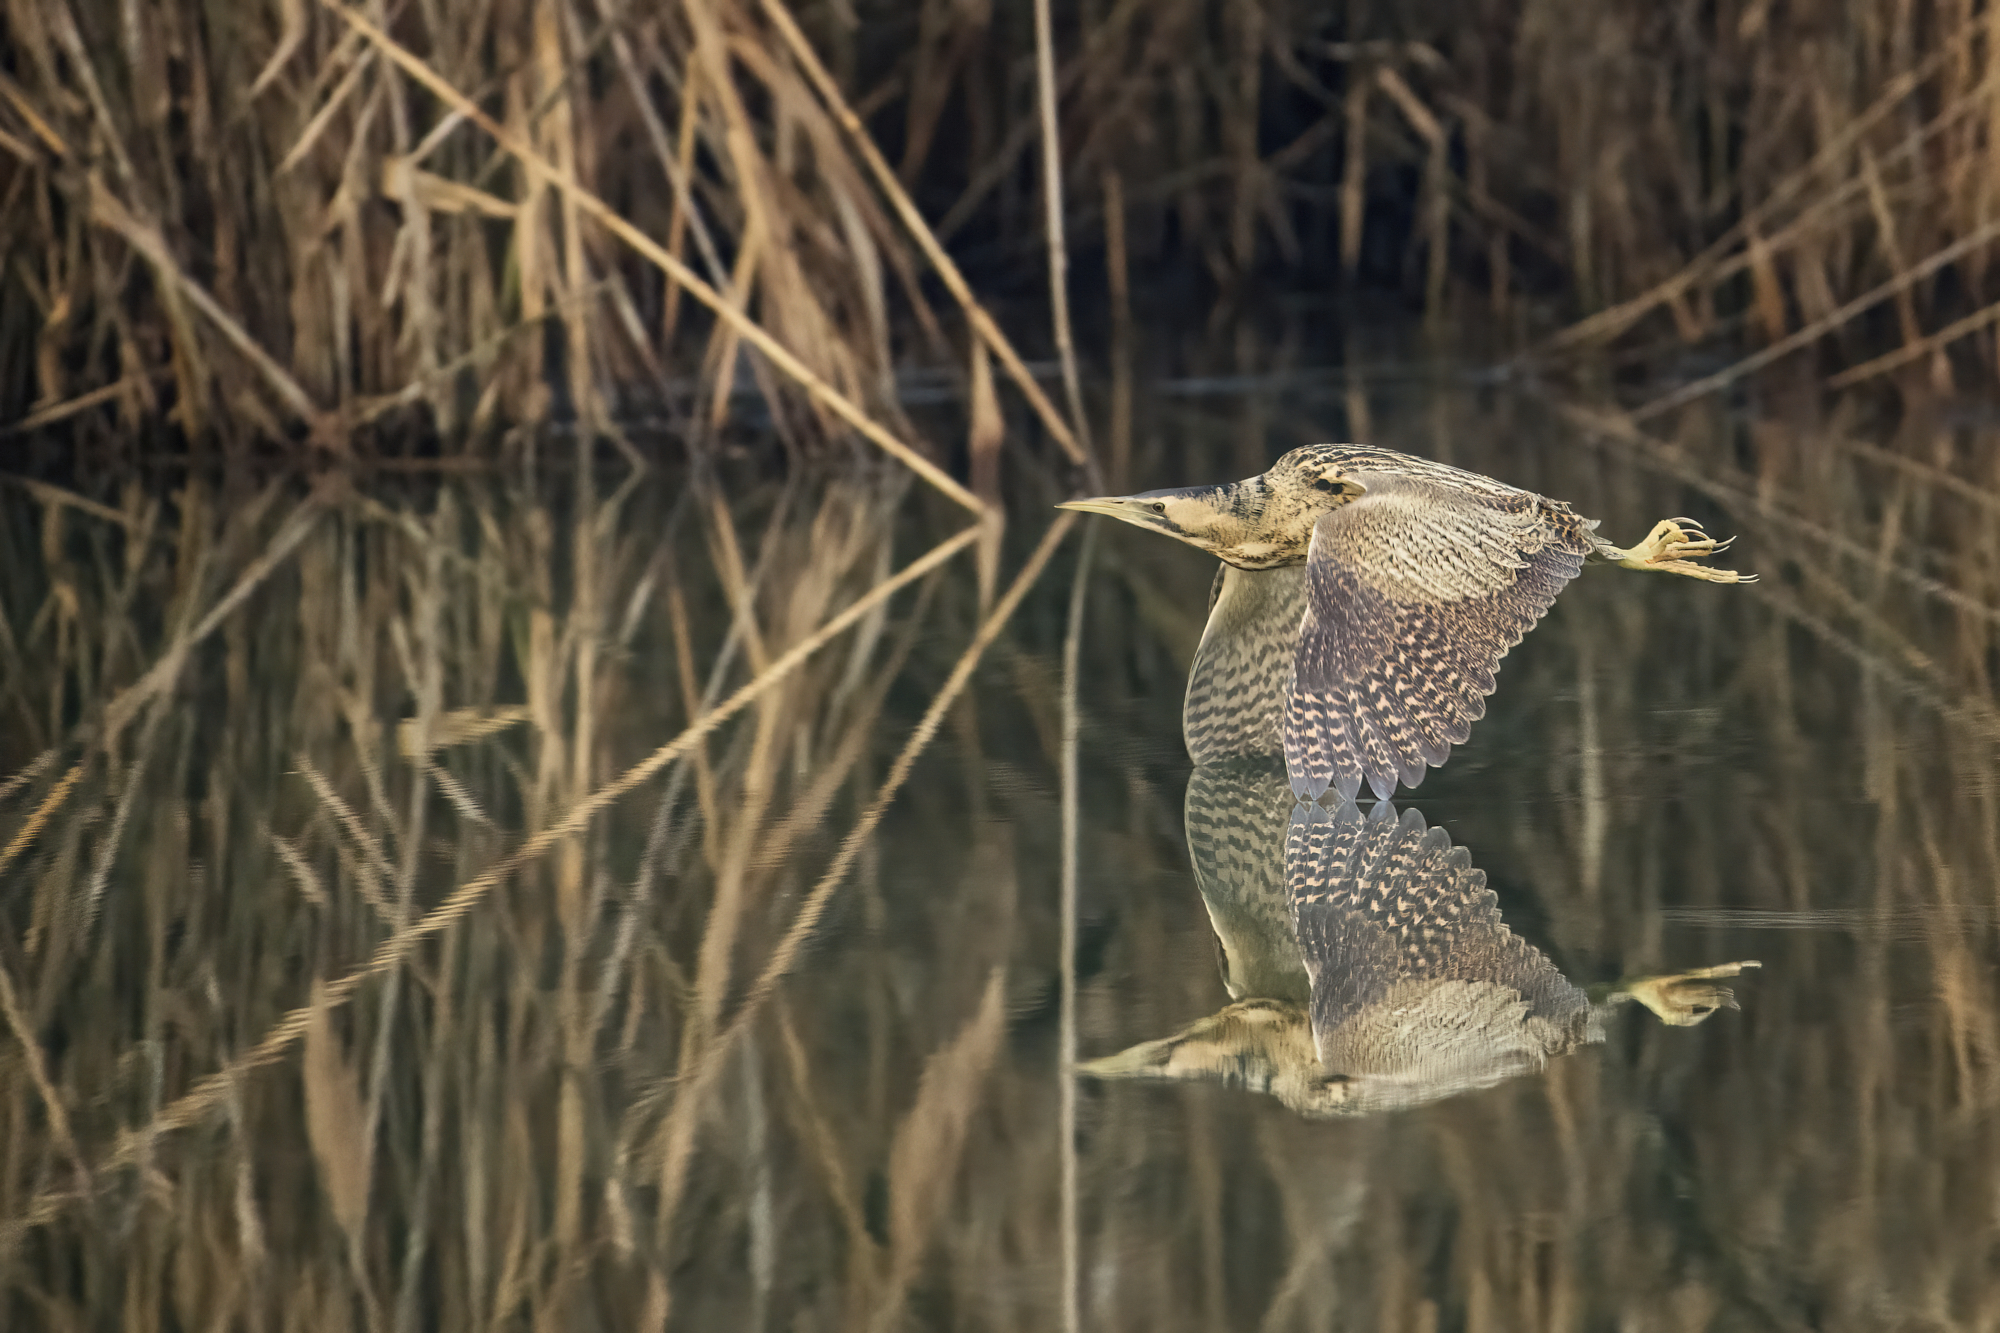 Bittern on the water's surface ...